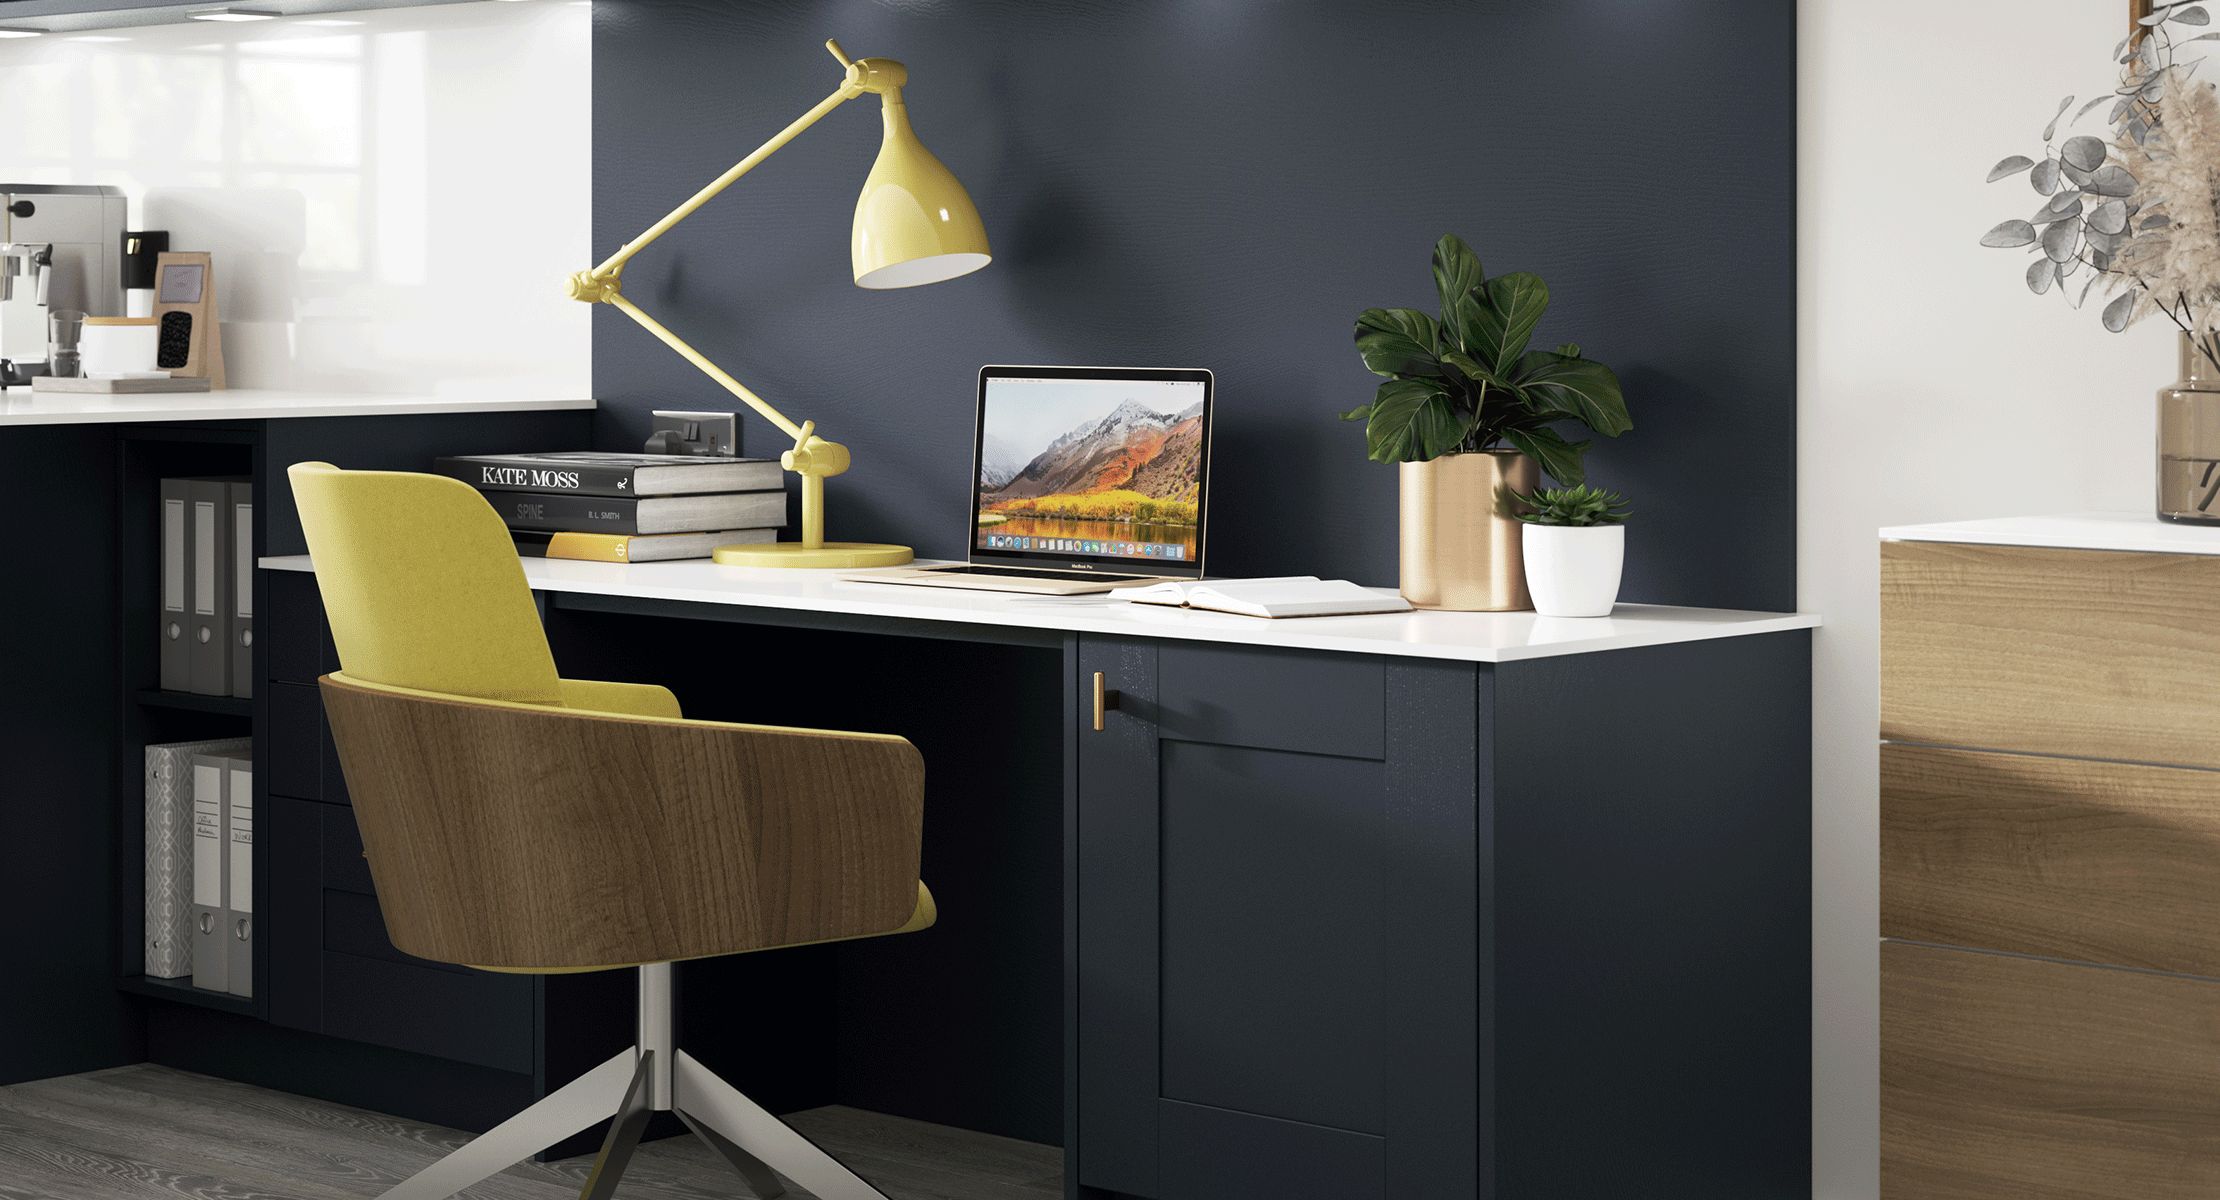 The benefits of a<br>home workspace